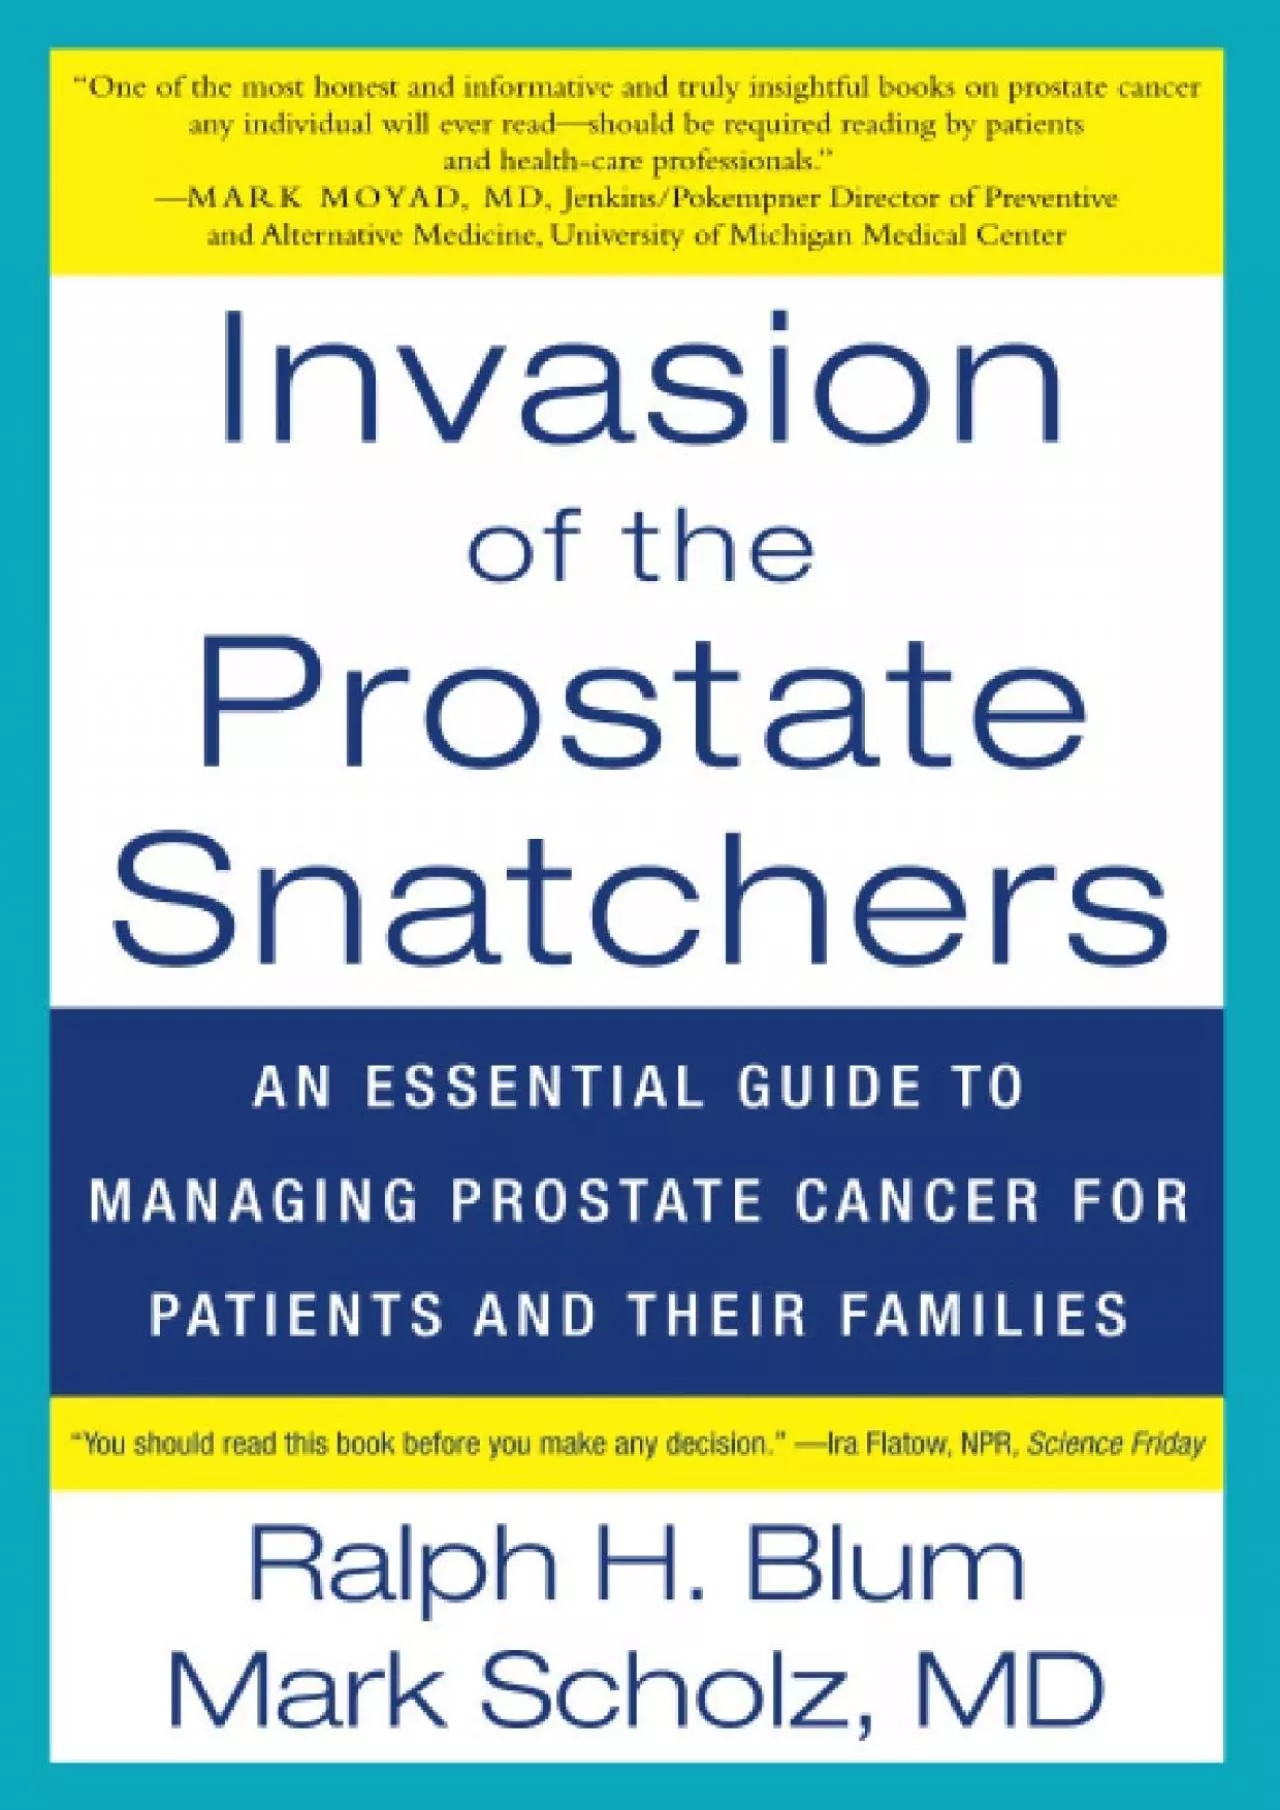 (BOOK)-Invasion of the Prostate Snatchers: An Essential Guide to Managing Prostate Cancer